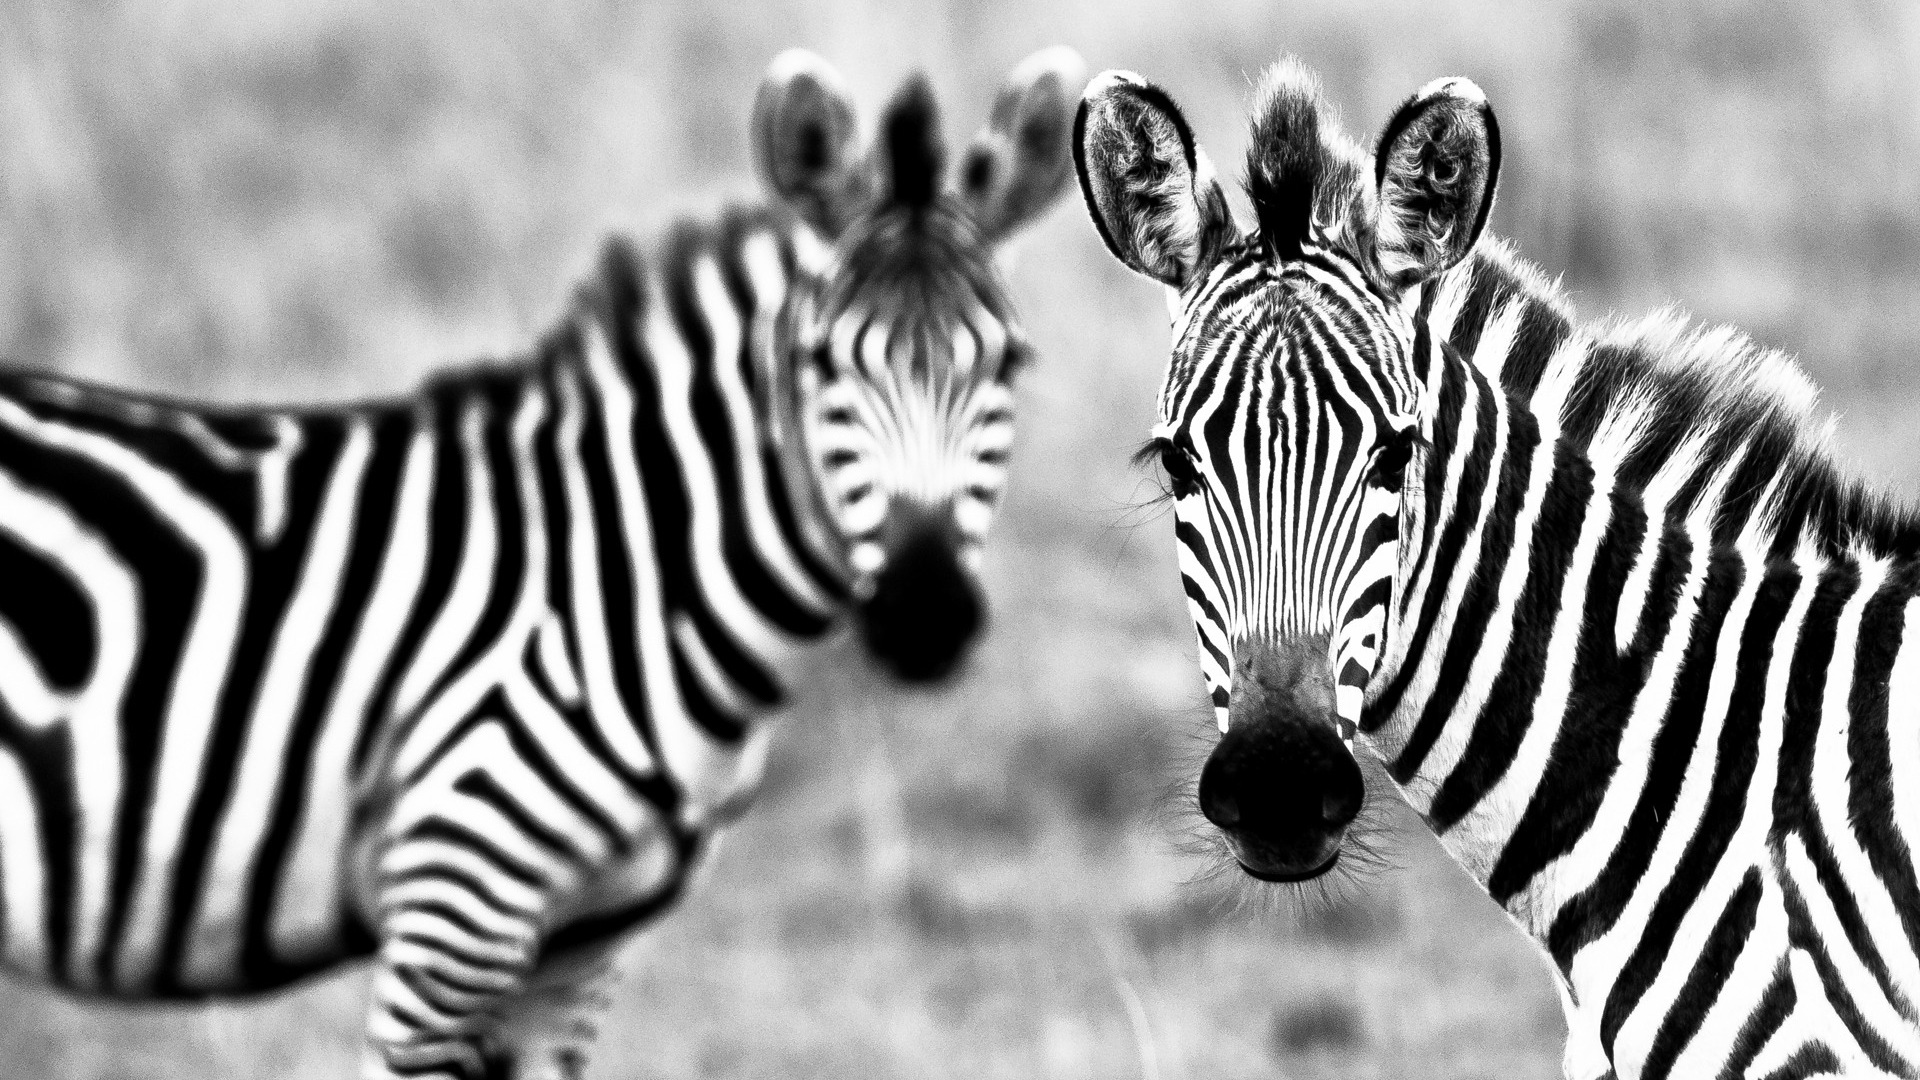 Black and white striped animal, zebra HD wallpapers #8 - 1920x1080